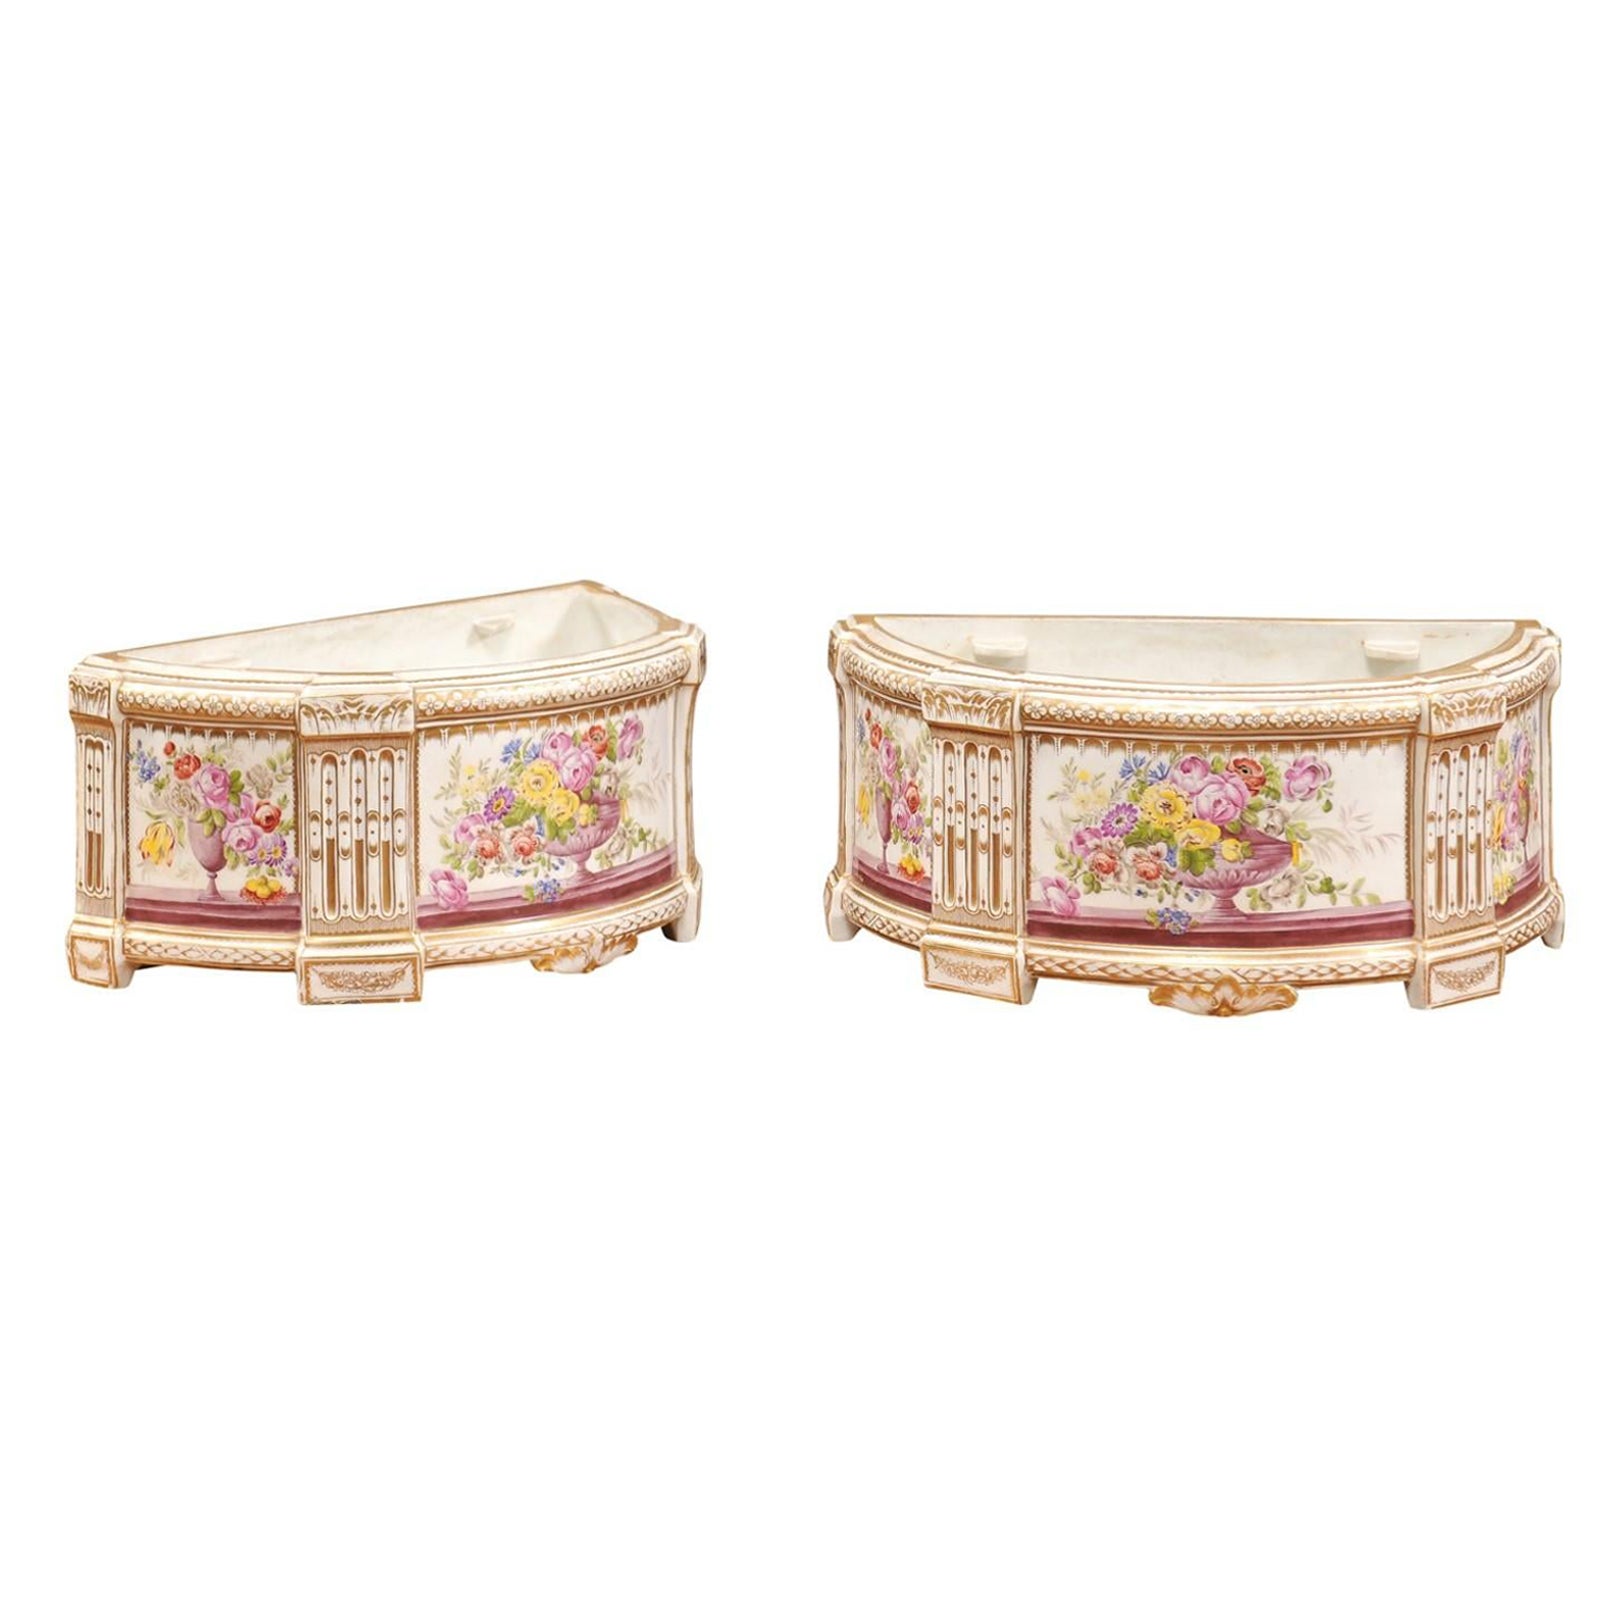 Pair of 19th Century French Porcelain Bough Pots with Gilt & Floral Accents For Sale